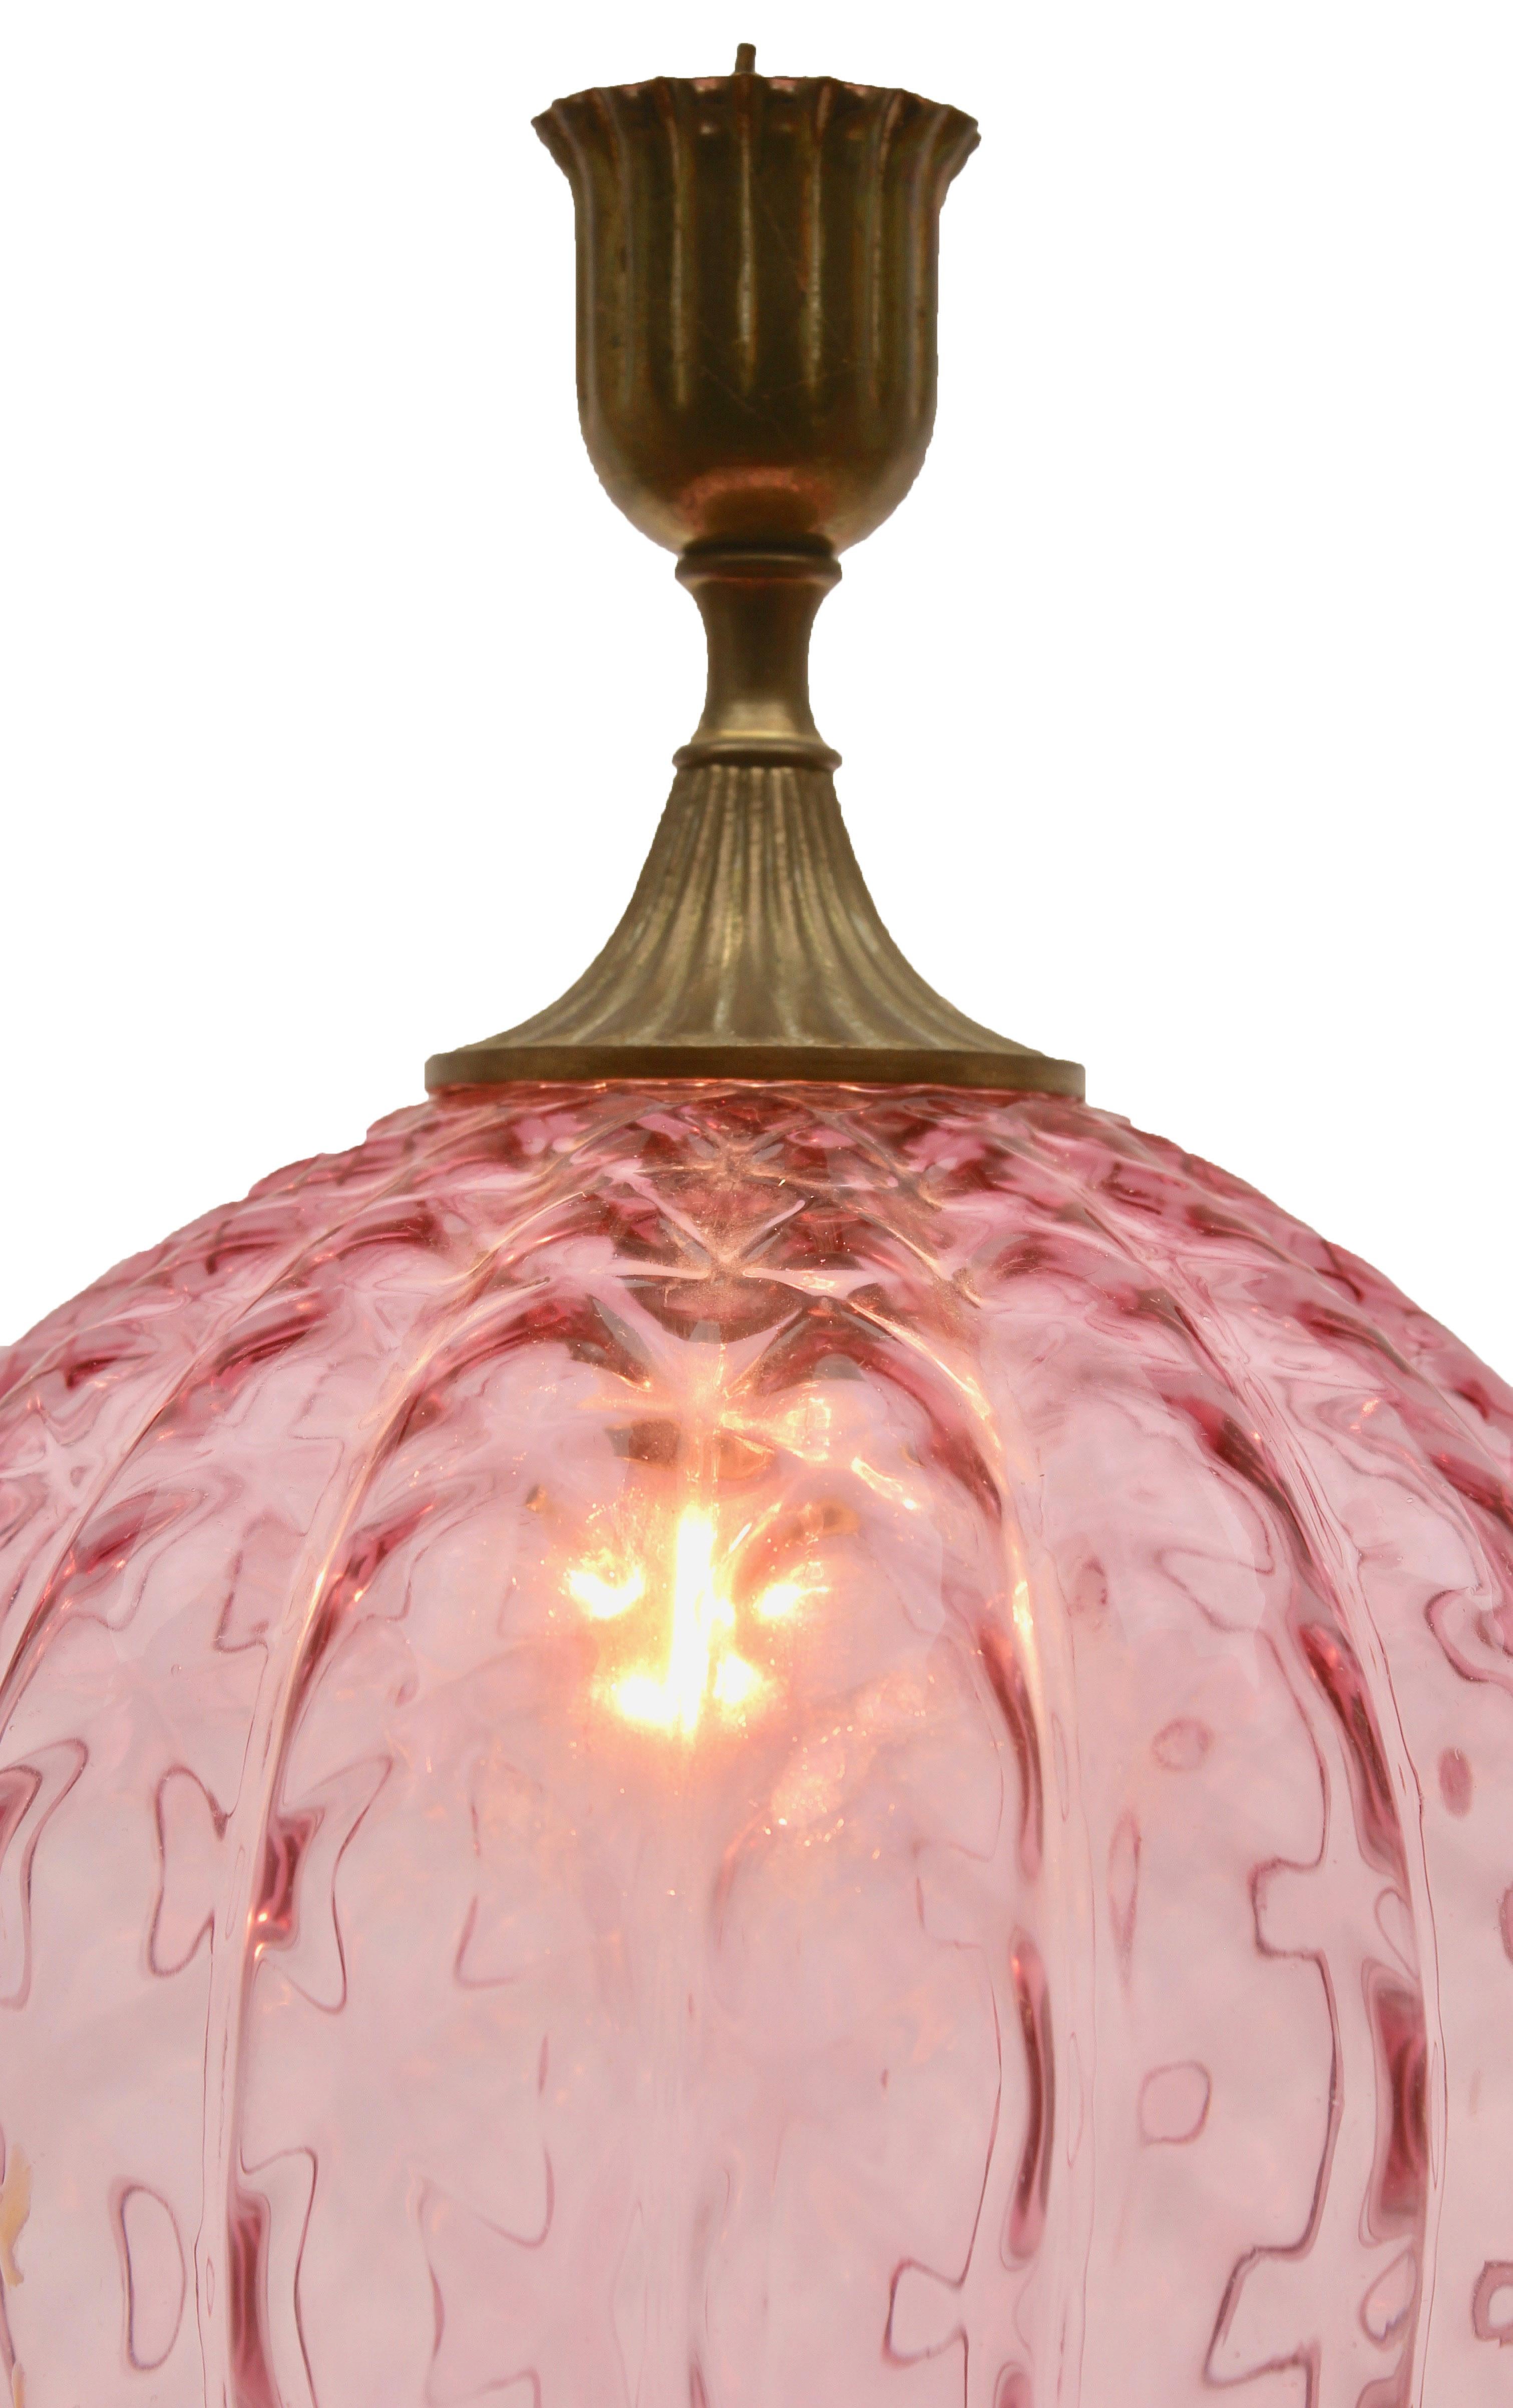 Italian glass hanging lamp with vertical ribs and diamond optic in rosaline (pink). Made by Empoli in the midcentury.

In excellent condition and in full working order fitting E27.

The sizes are (without the chain) H 40 cm 15.74 inc, W 26 cm